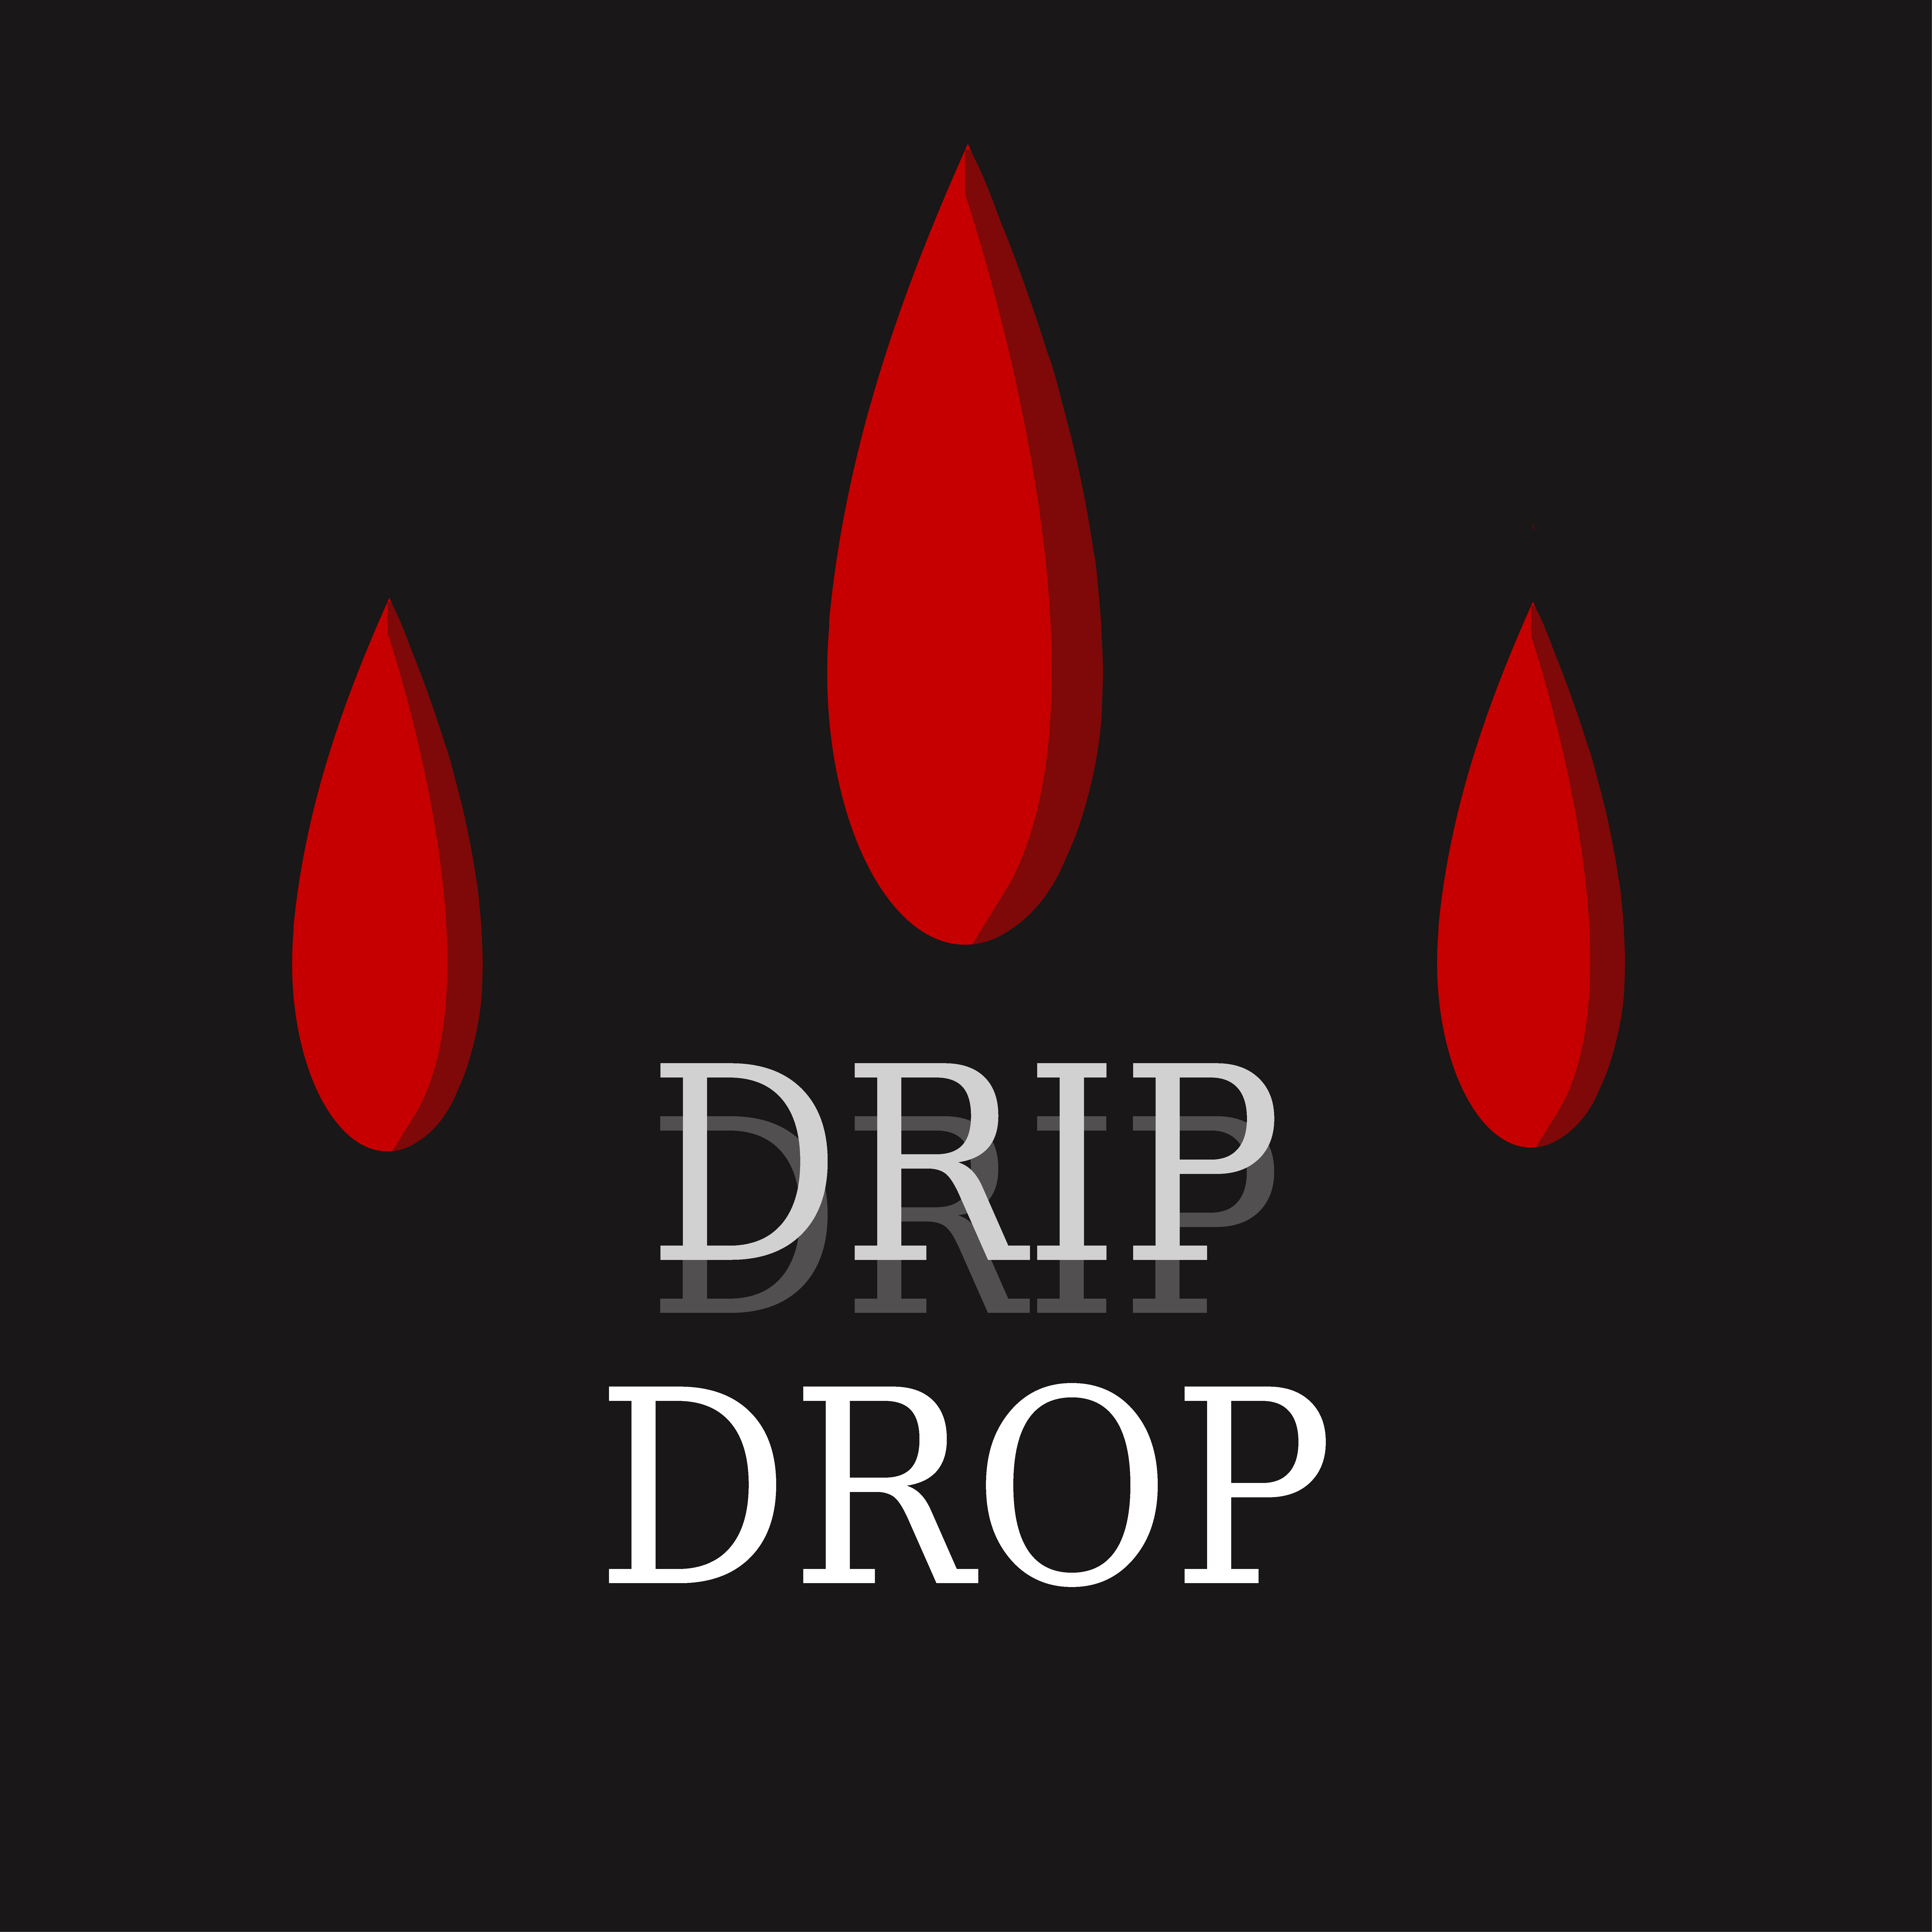 Red Bubble Drop Logo - My new design is available on #Redbubble. Order Drip Drip Drop ...